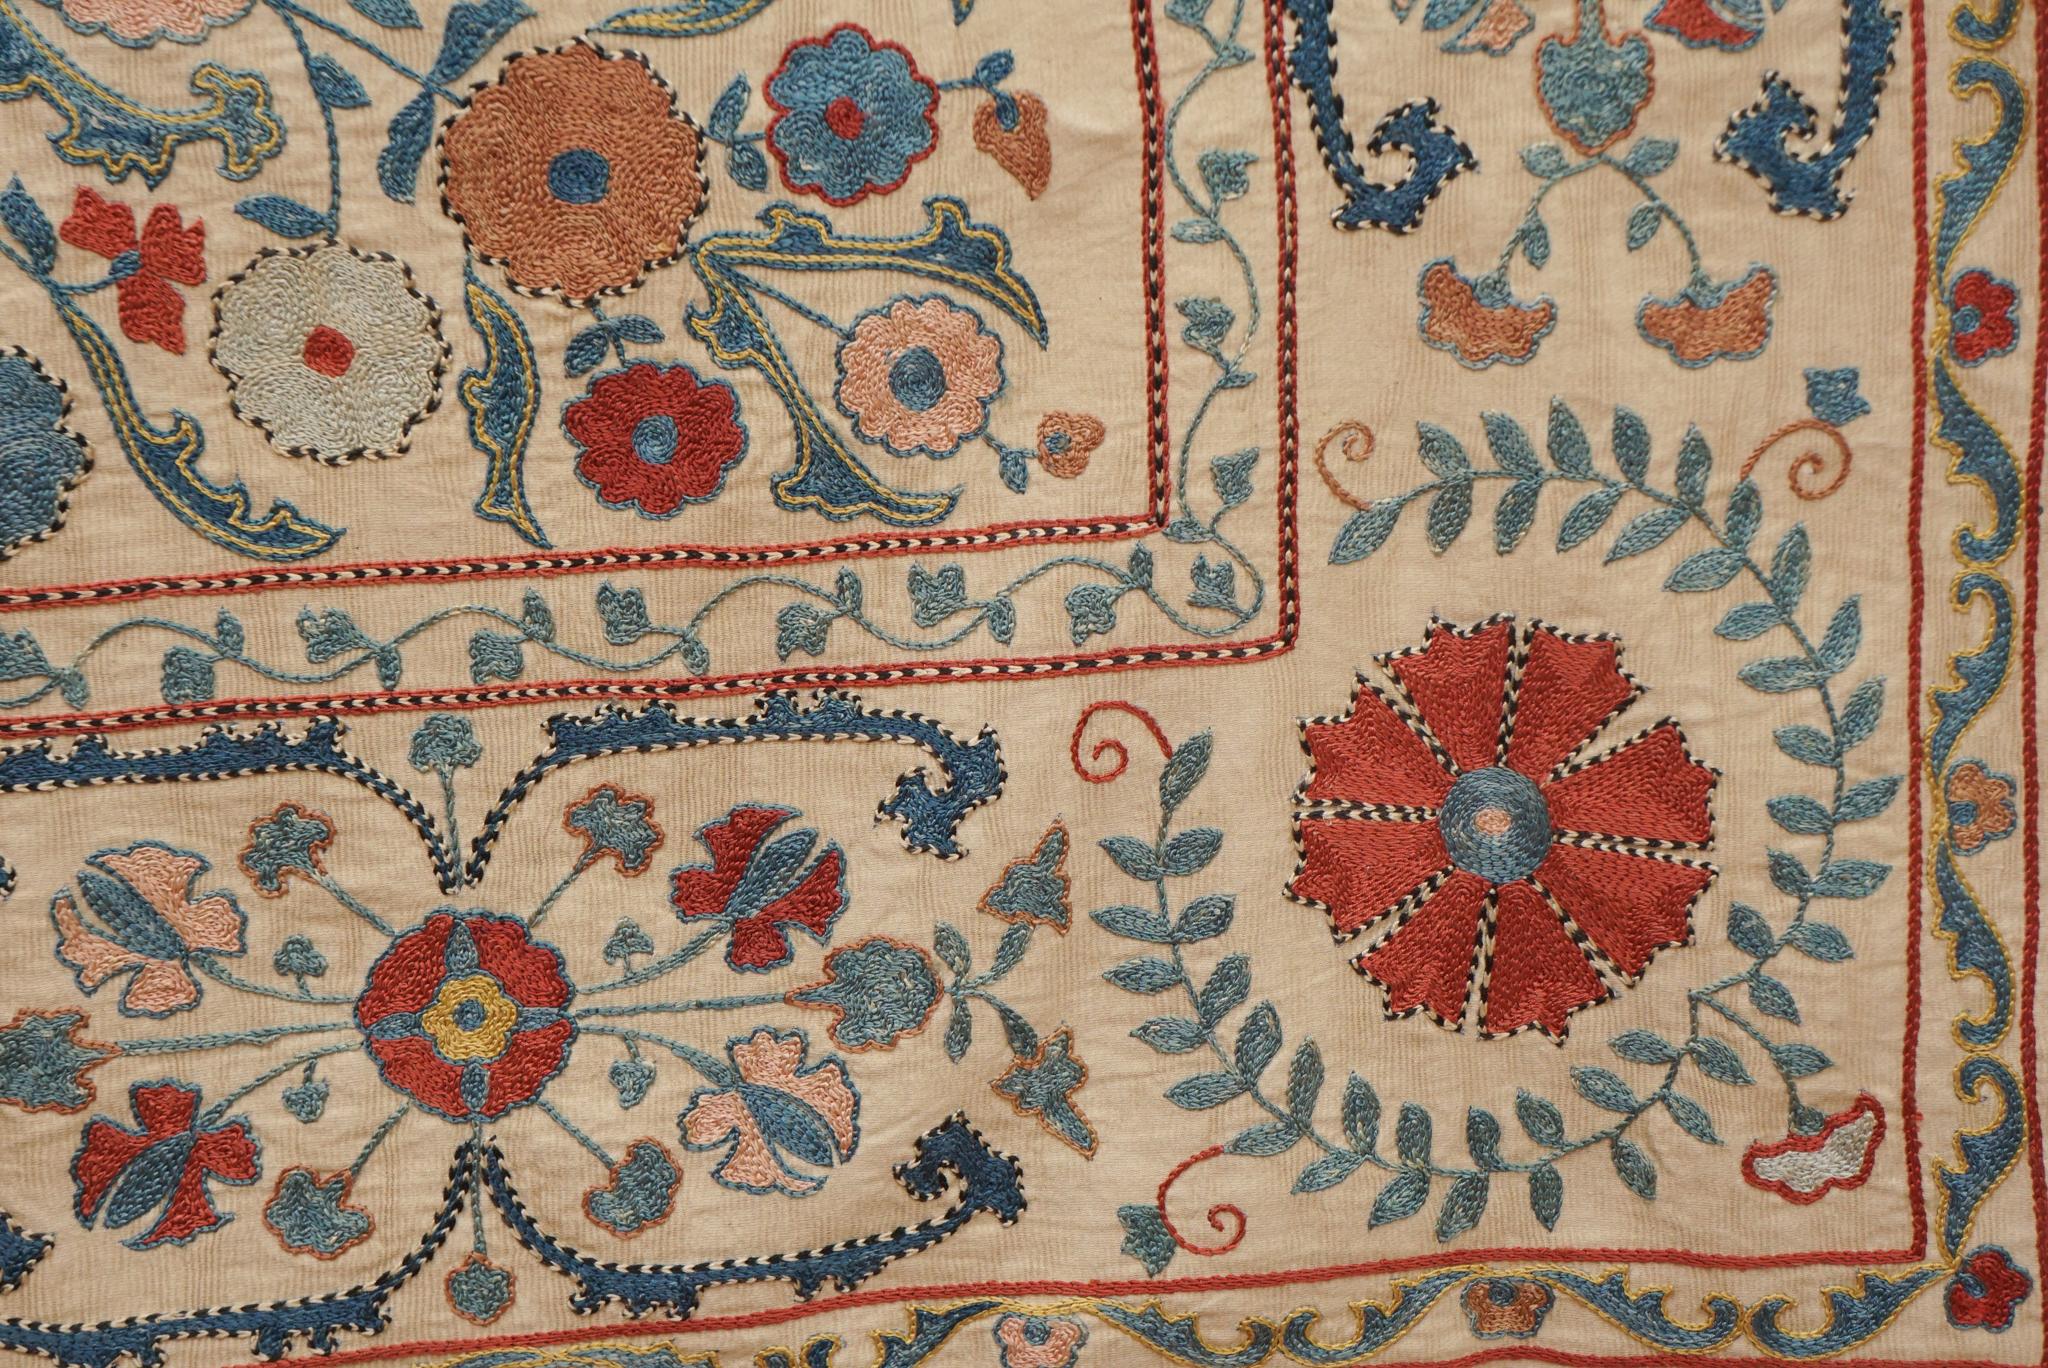 Antique Suzani Embroidered Textile In Good Condition For Sale In Hudson, NY